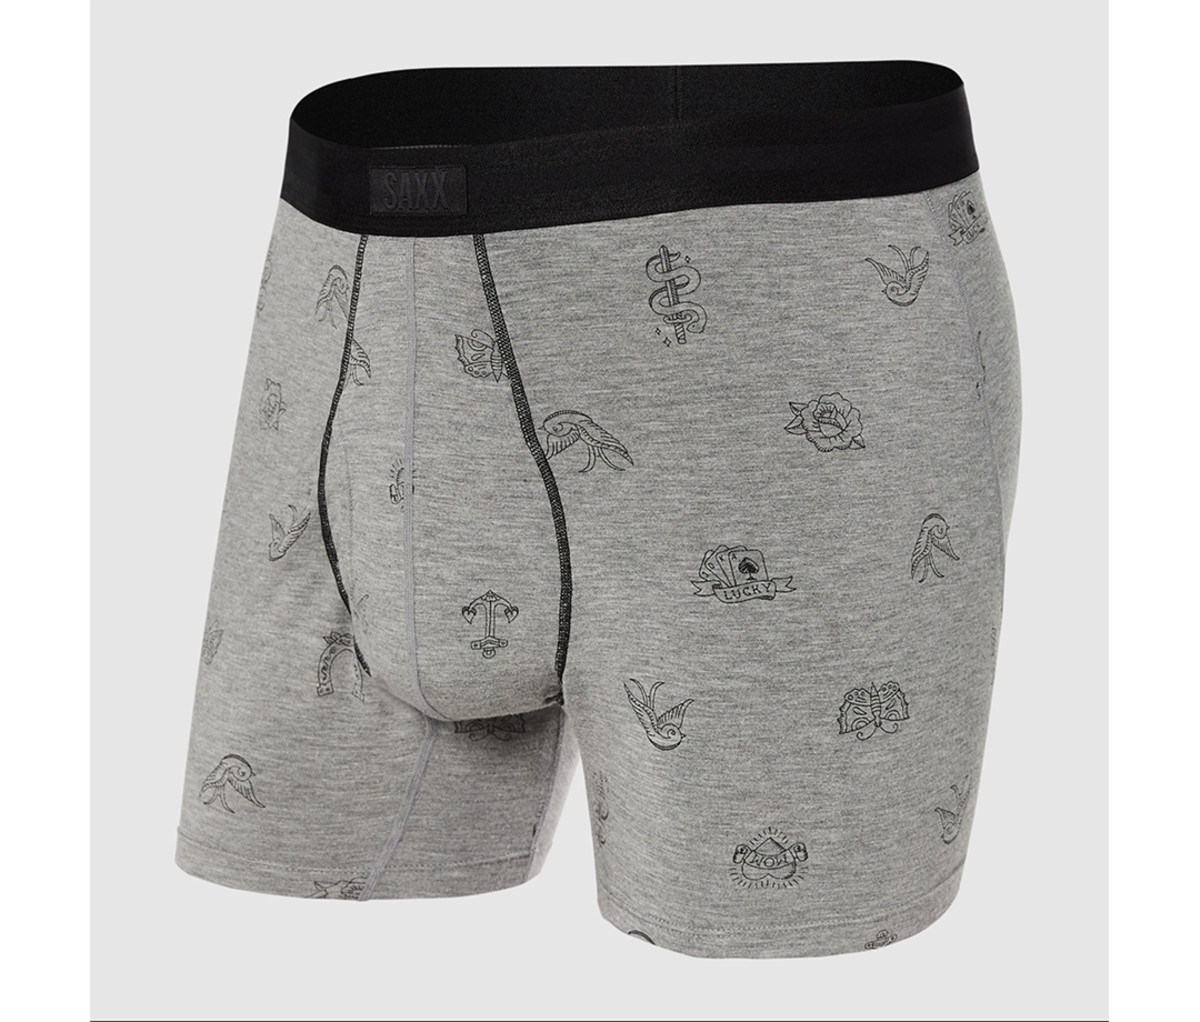 Cashmere Underwear From Saxx Will Make a Great Gift This Holiday - Men ...